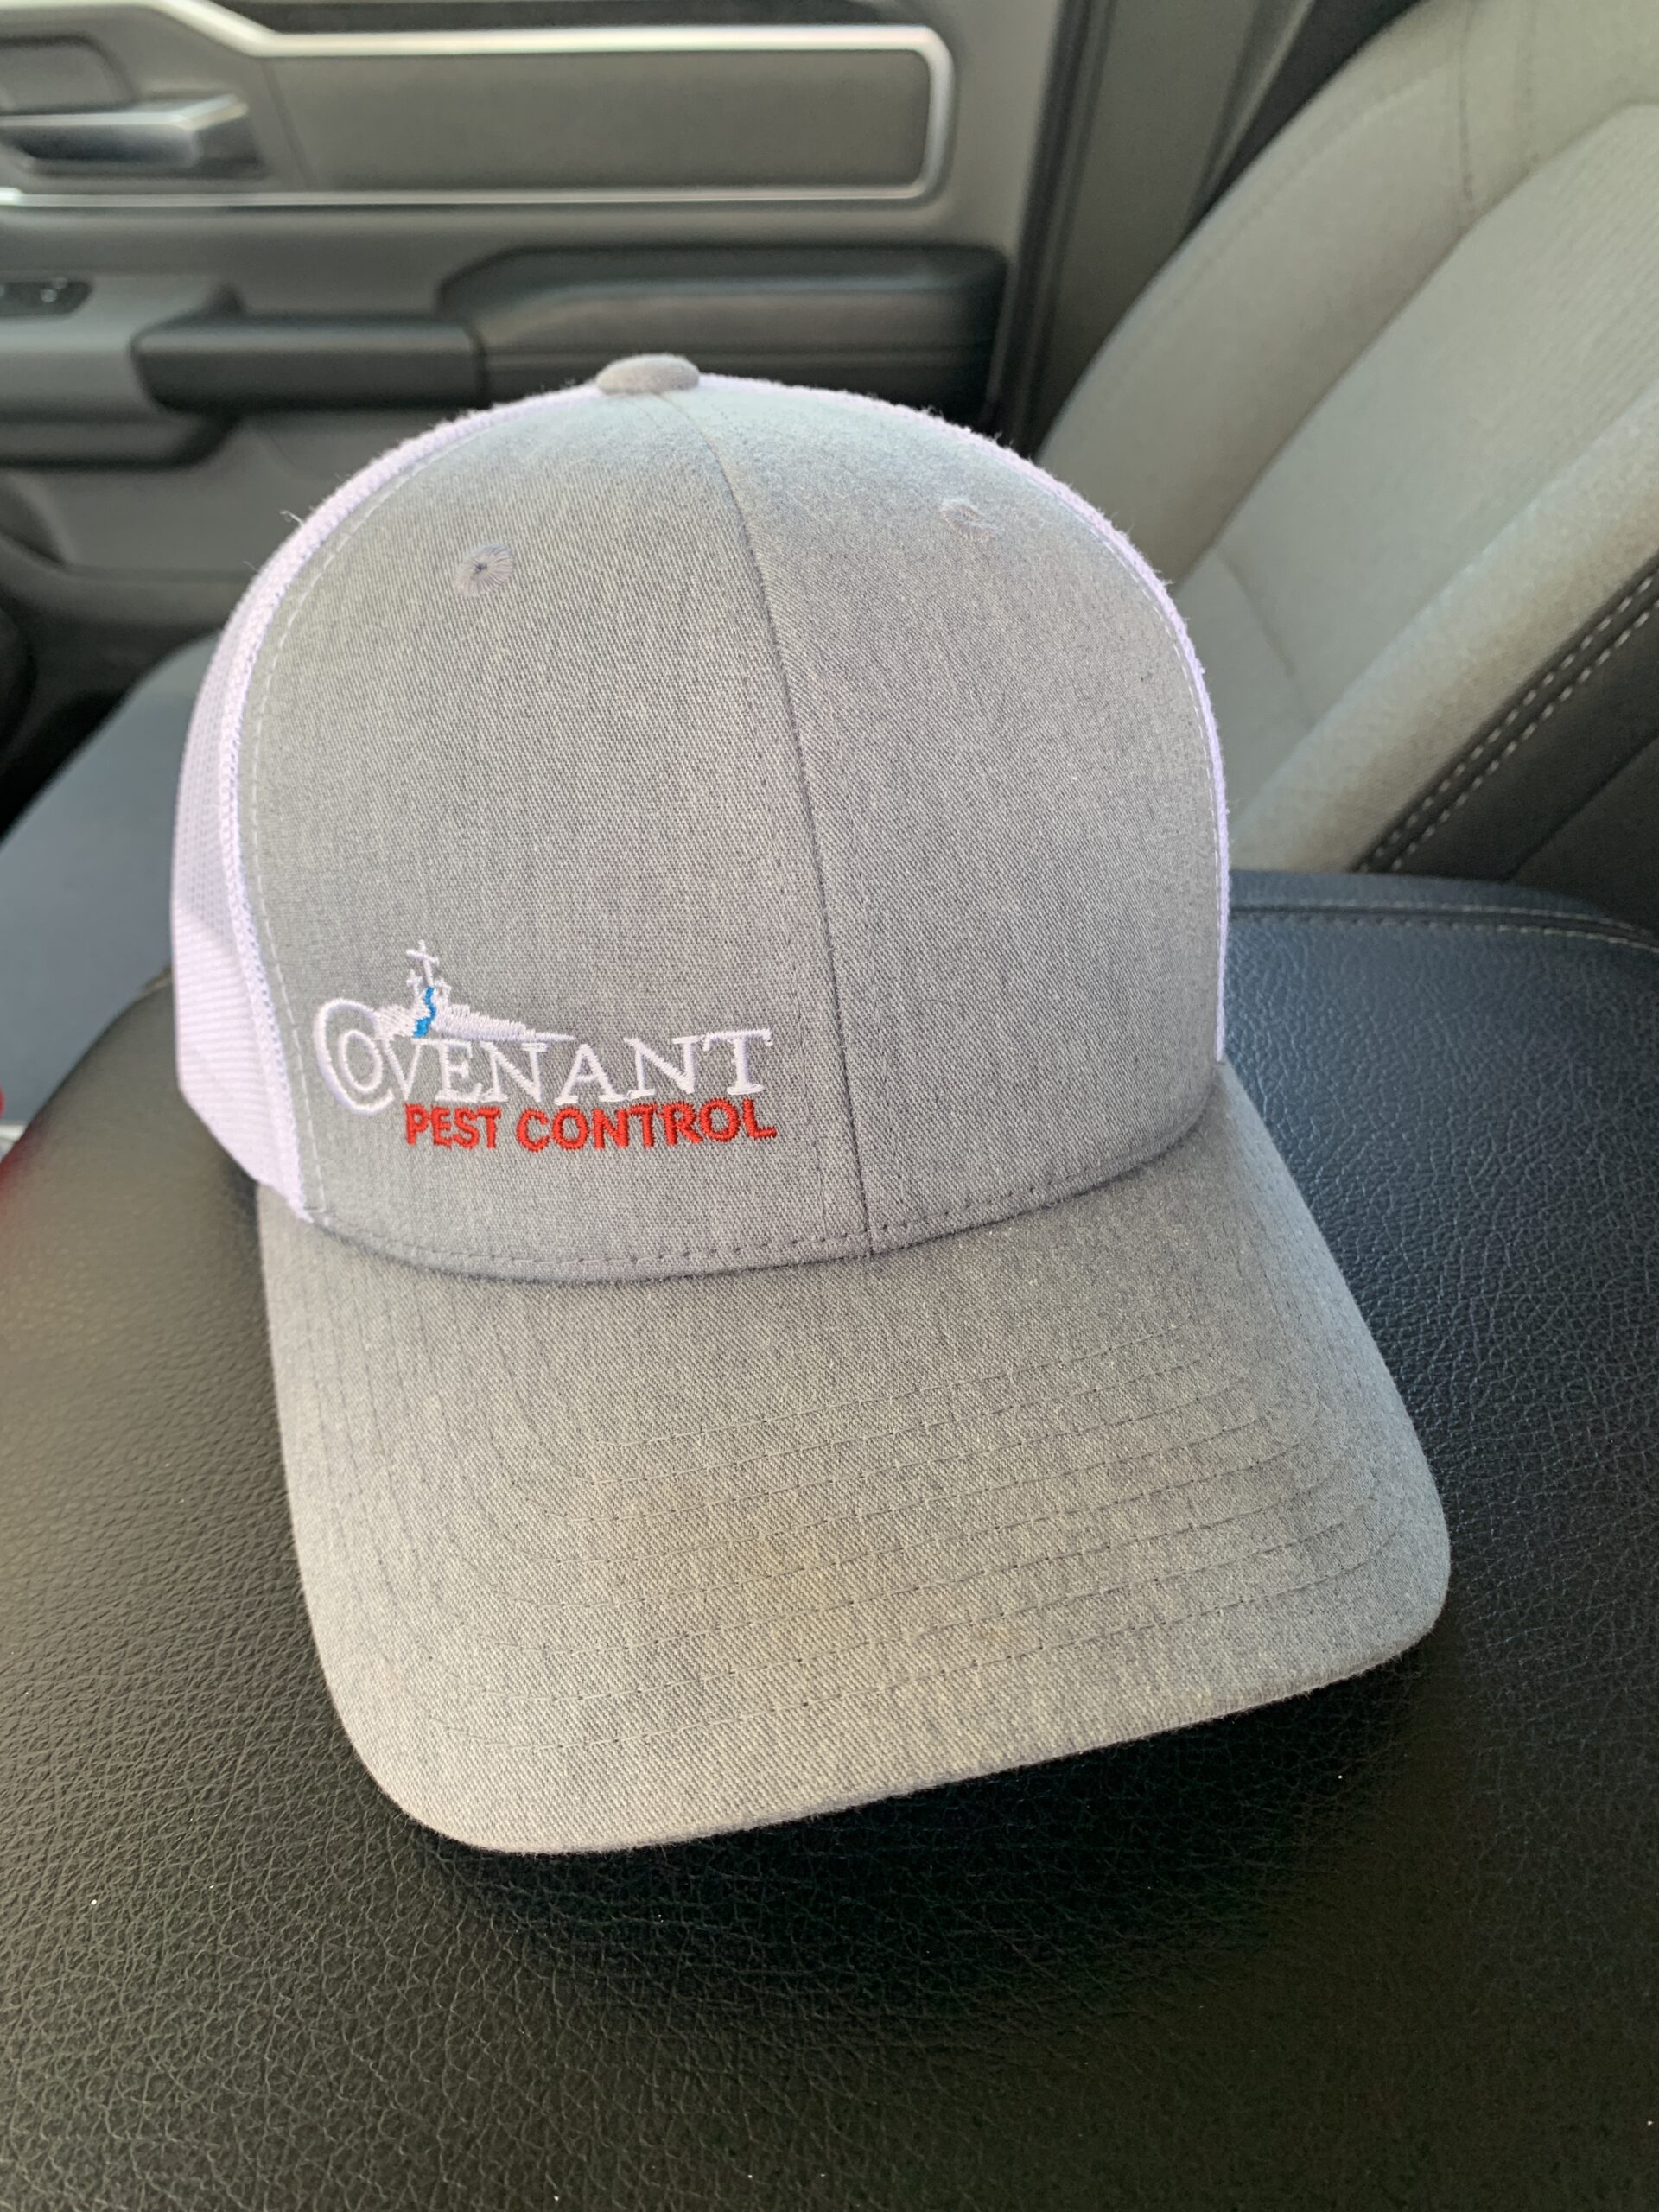 Hat embroidered with corporate logo